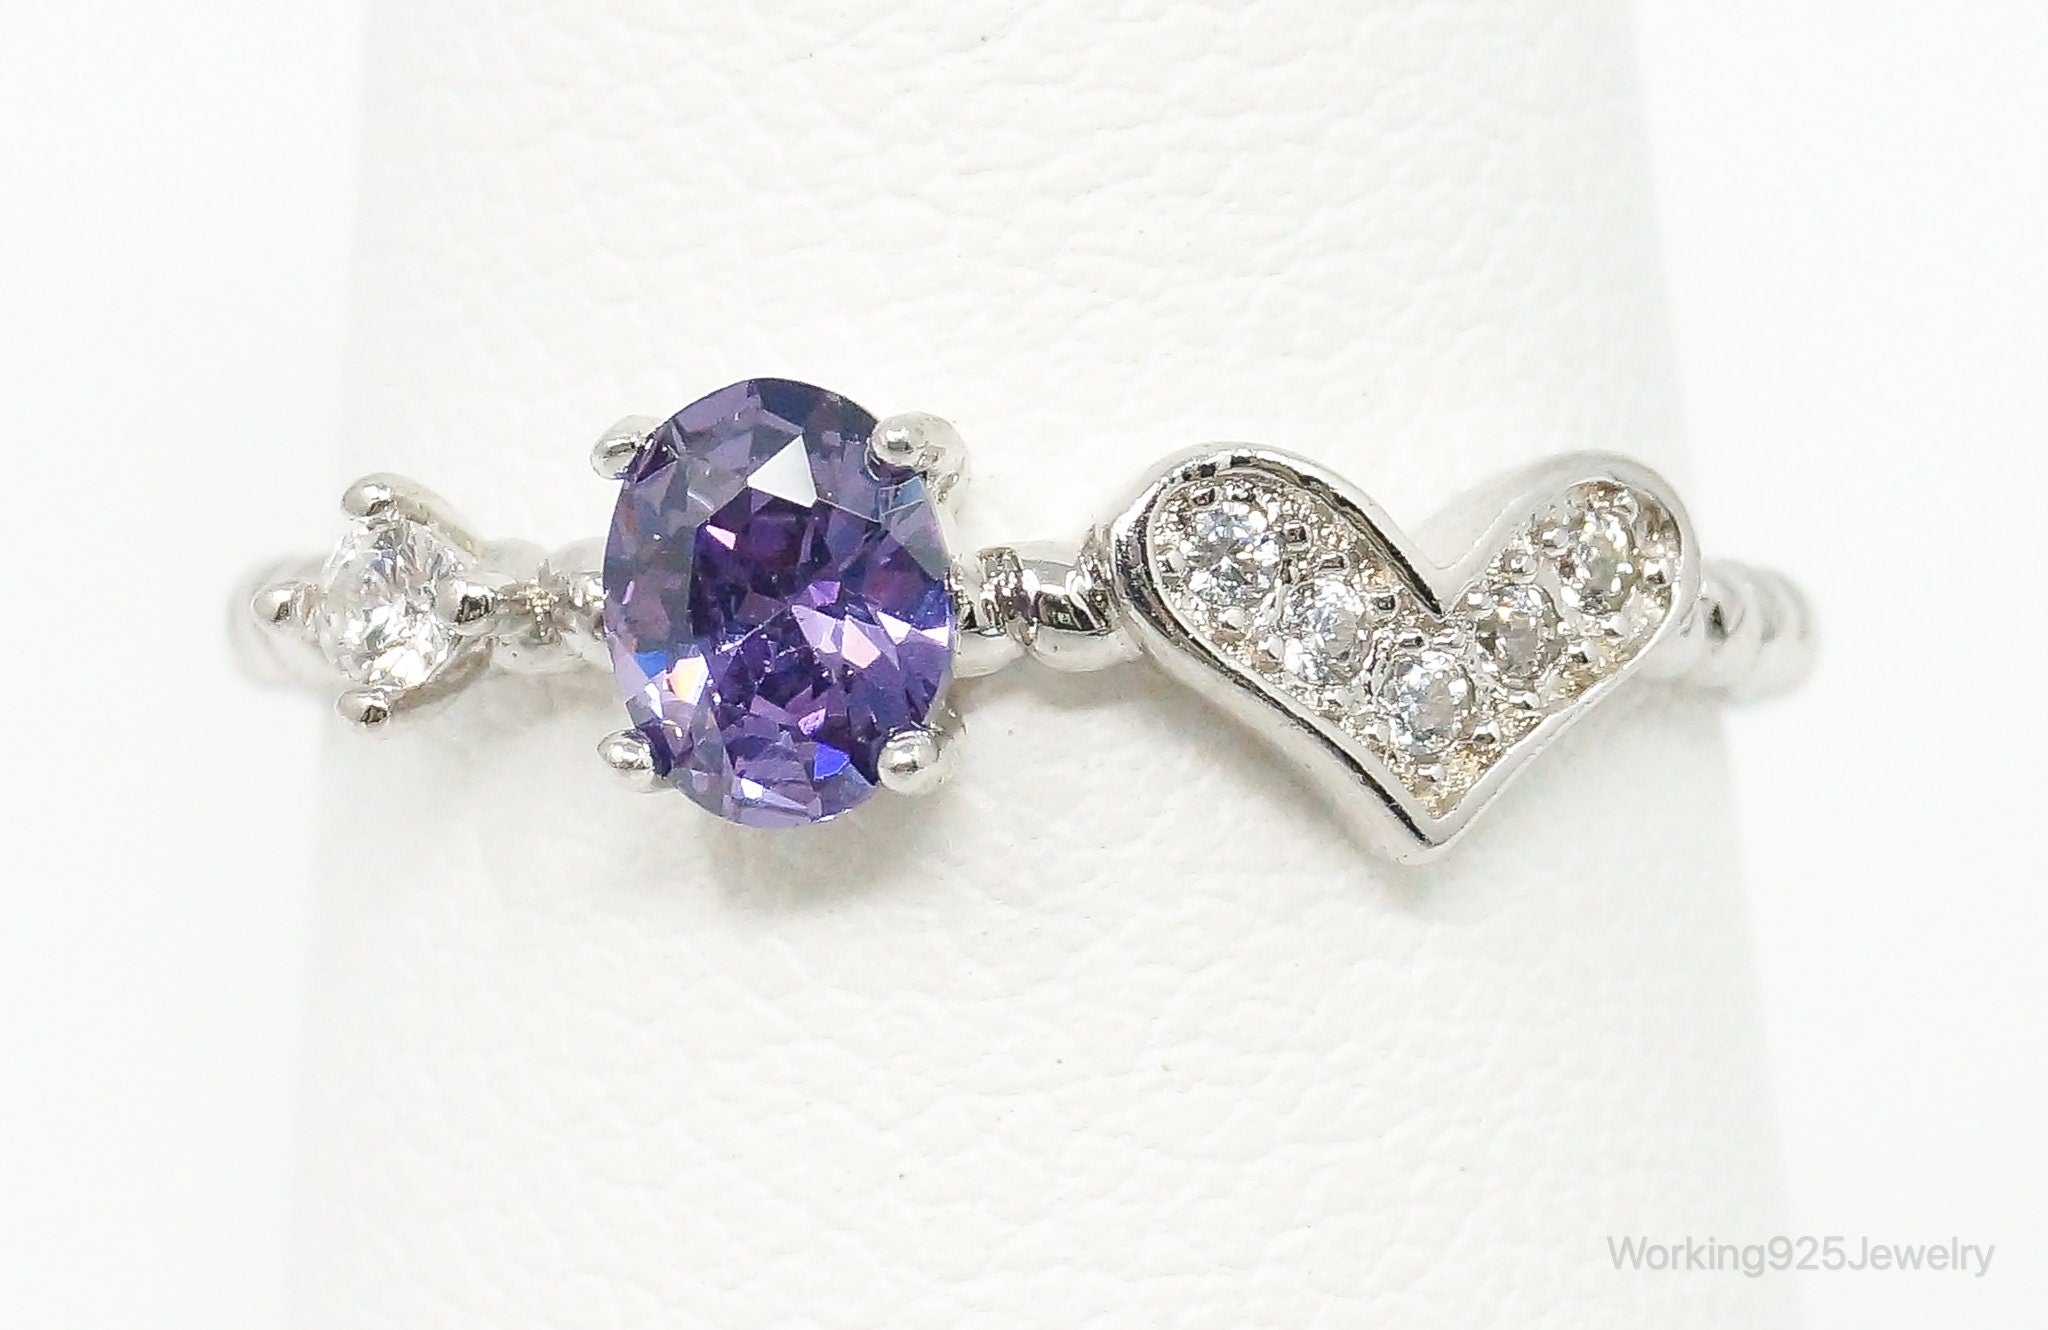 Vintage Amethyst Cubic Zirconia Heart Sterling Silver Ring - Size 6.5 Adjustable